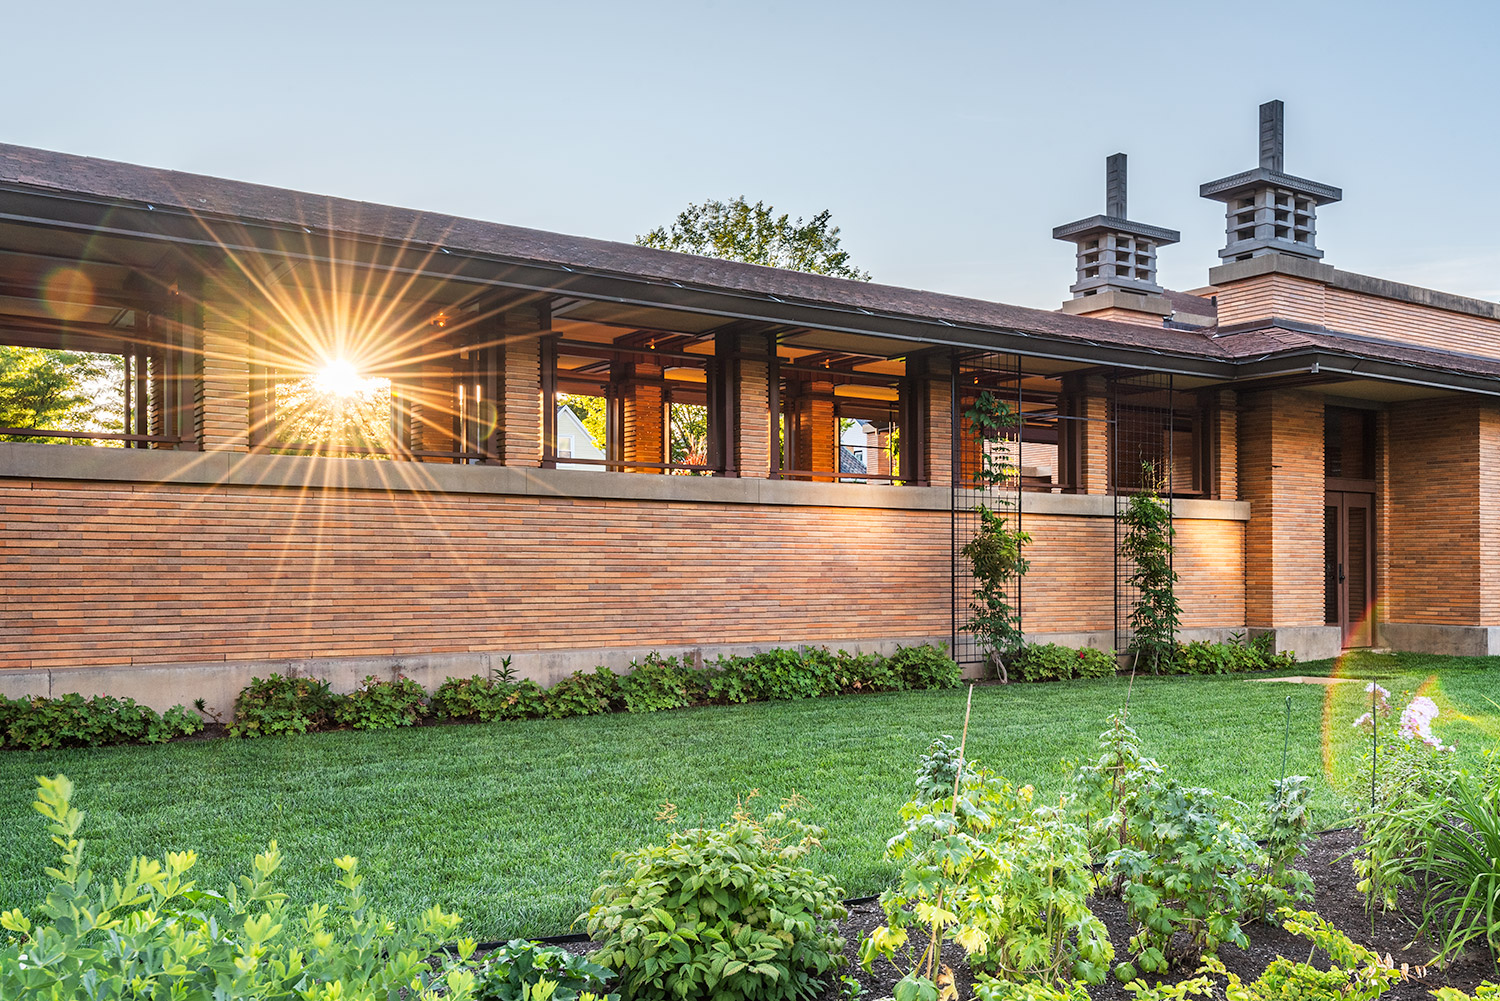 UNESCO Adds Frank Lloyd Wright’s Architecture to World Heritage List